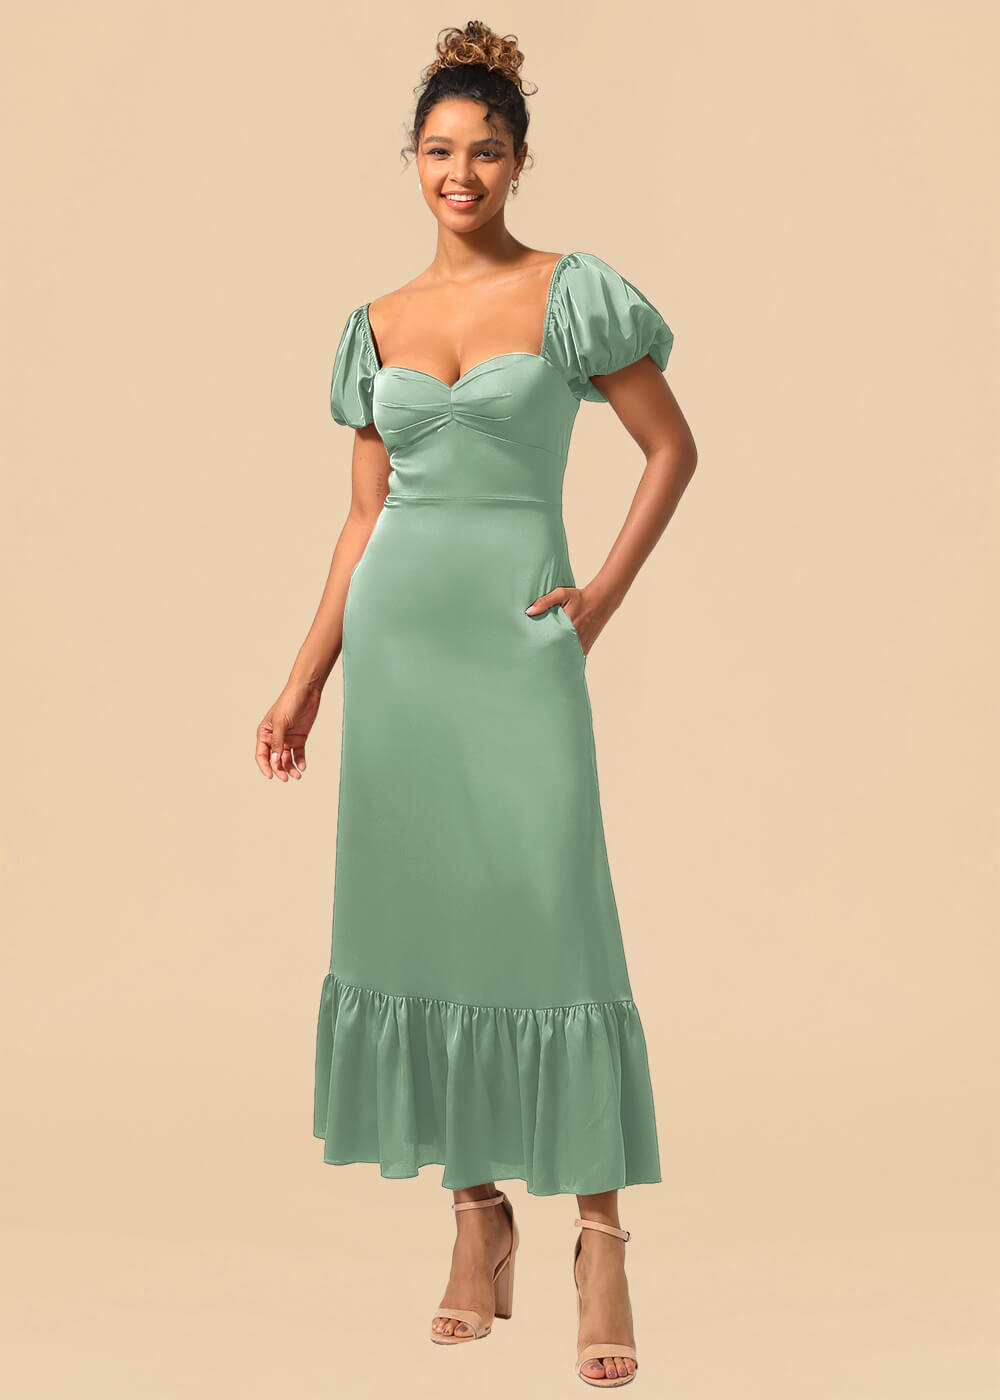 Satin A-line Ankle Length Sweetheart Puff Sleeve Bridesmaid Dress with Pockets